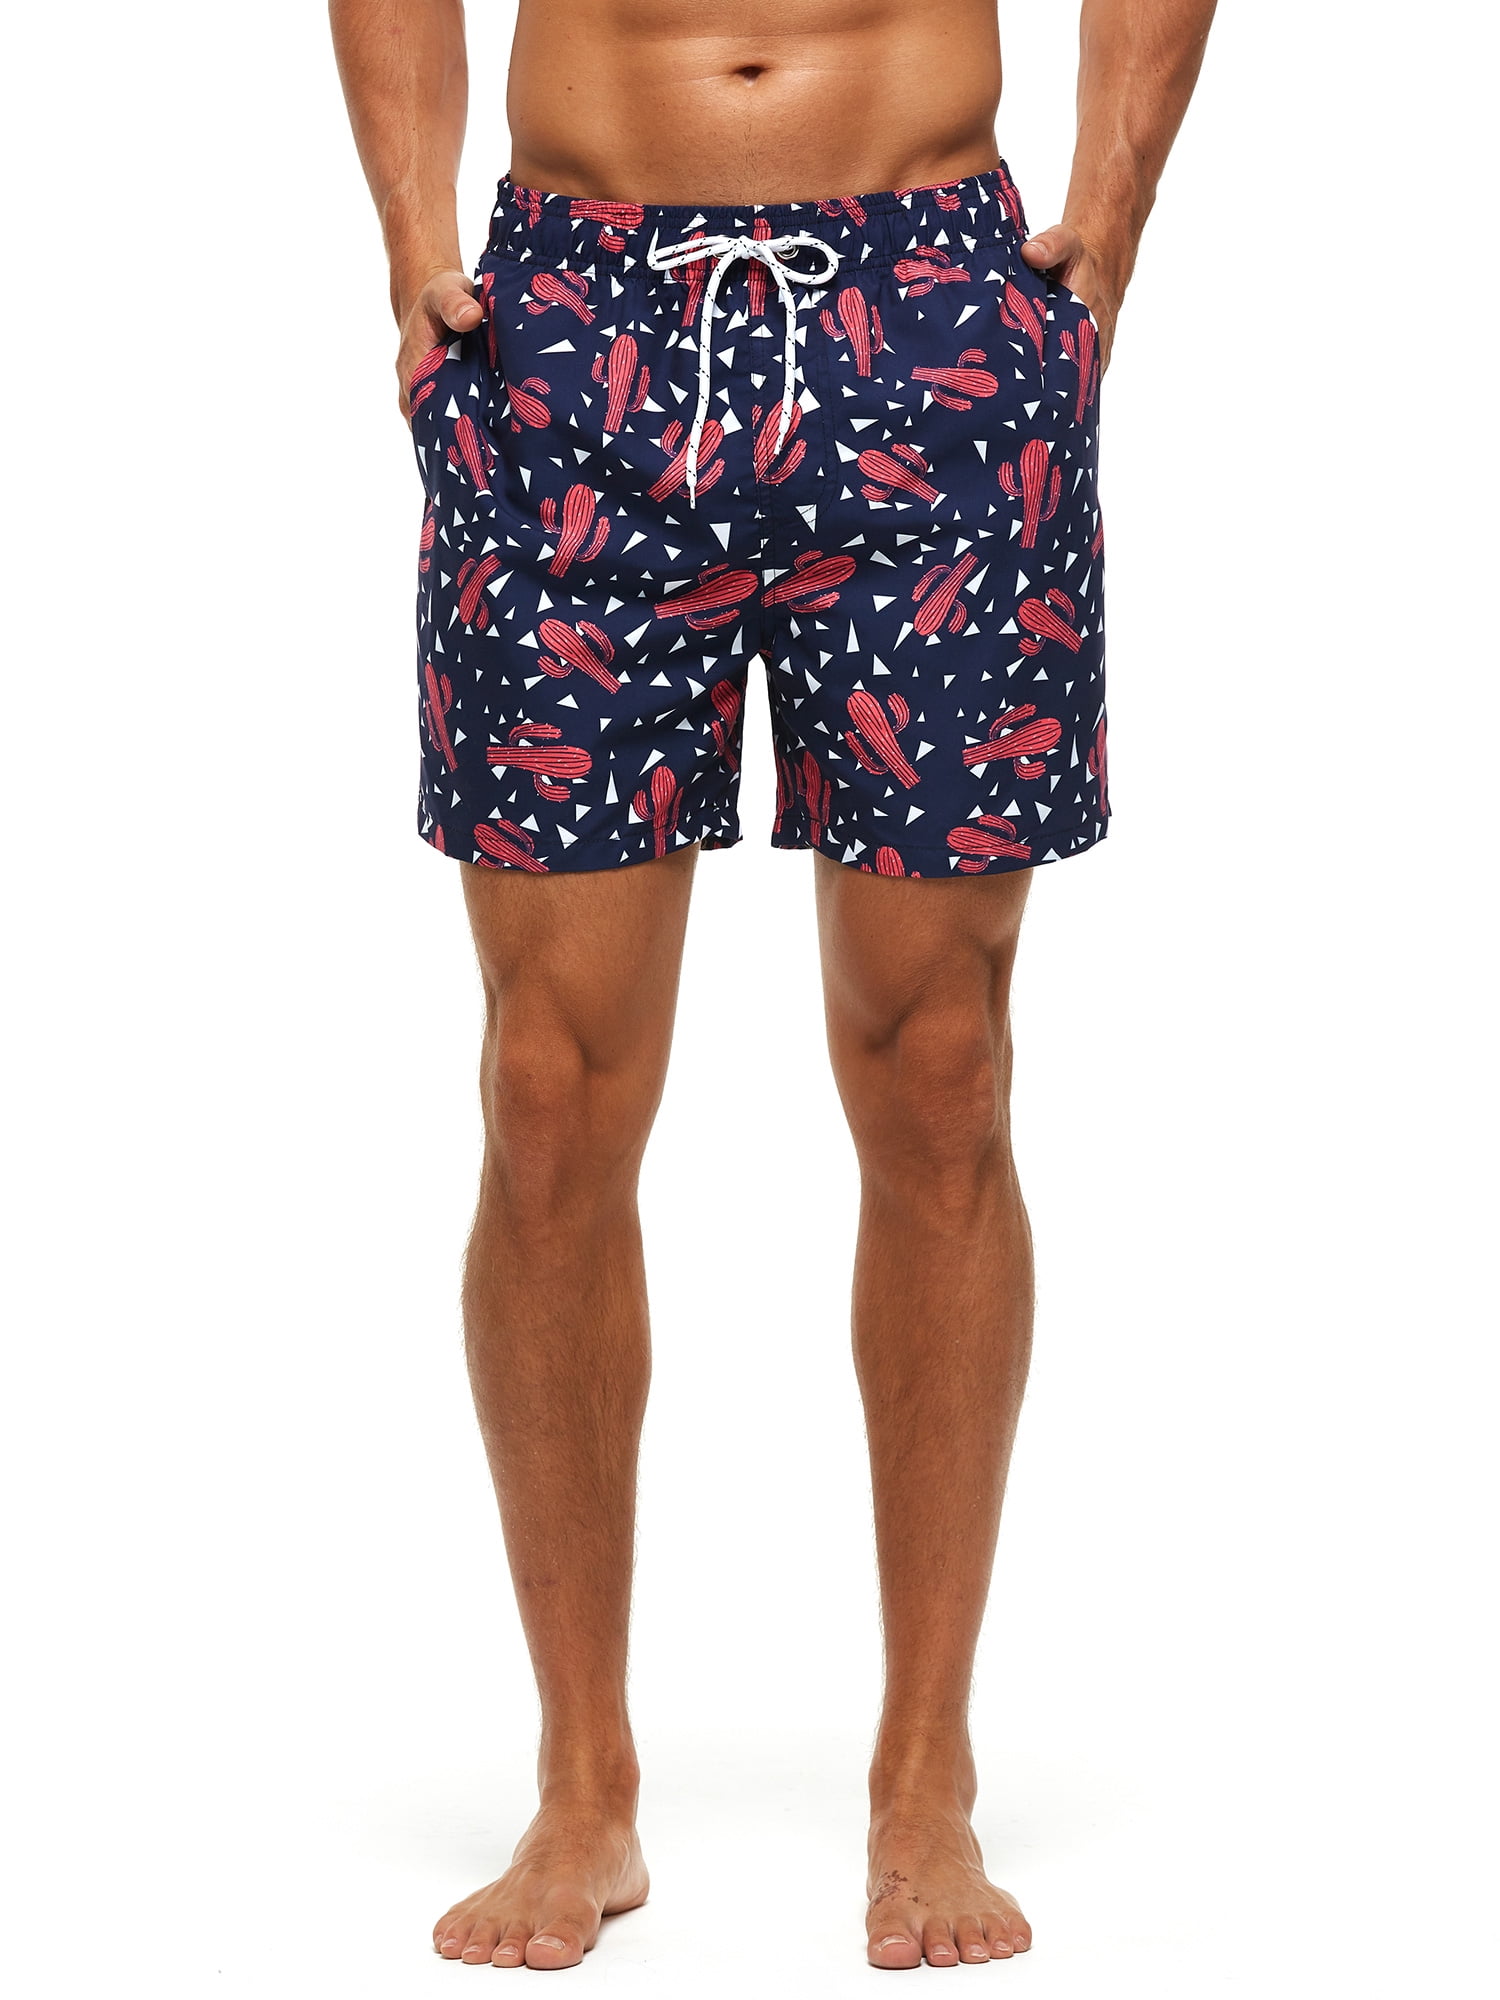 Leisue Red Daisy Quick Dry Elastic Lace Boardshorts Beach Shorts Pants Swim Trunks Mens Swimsuit with Pockets 